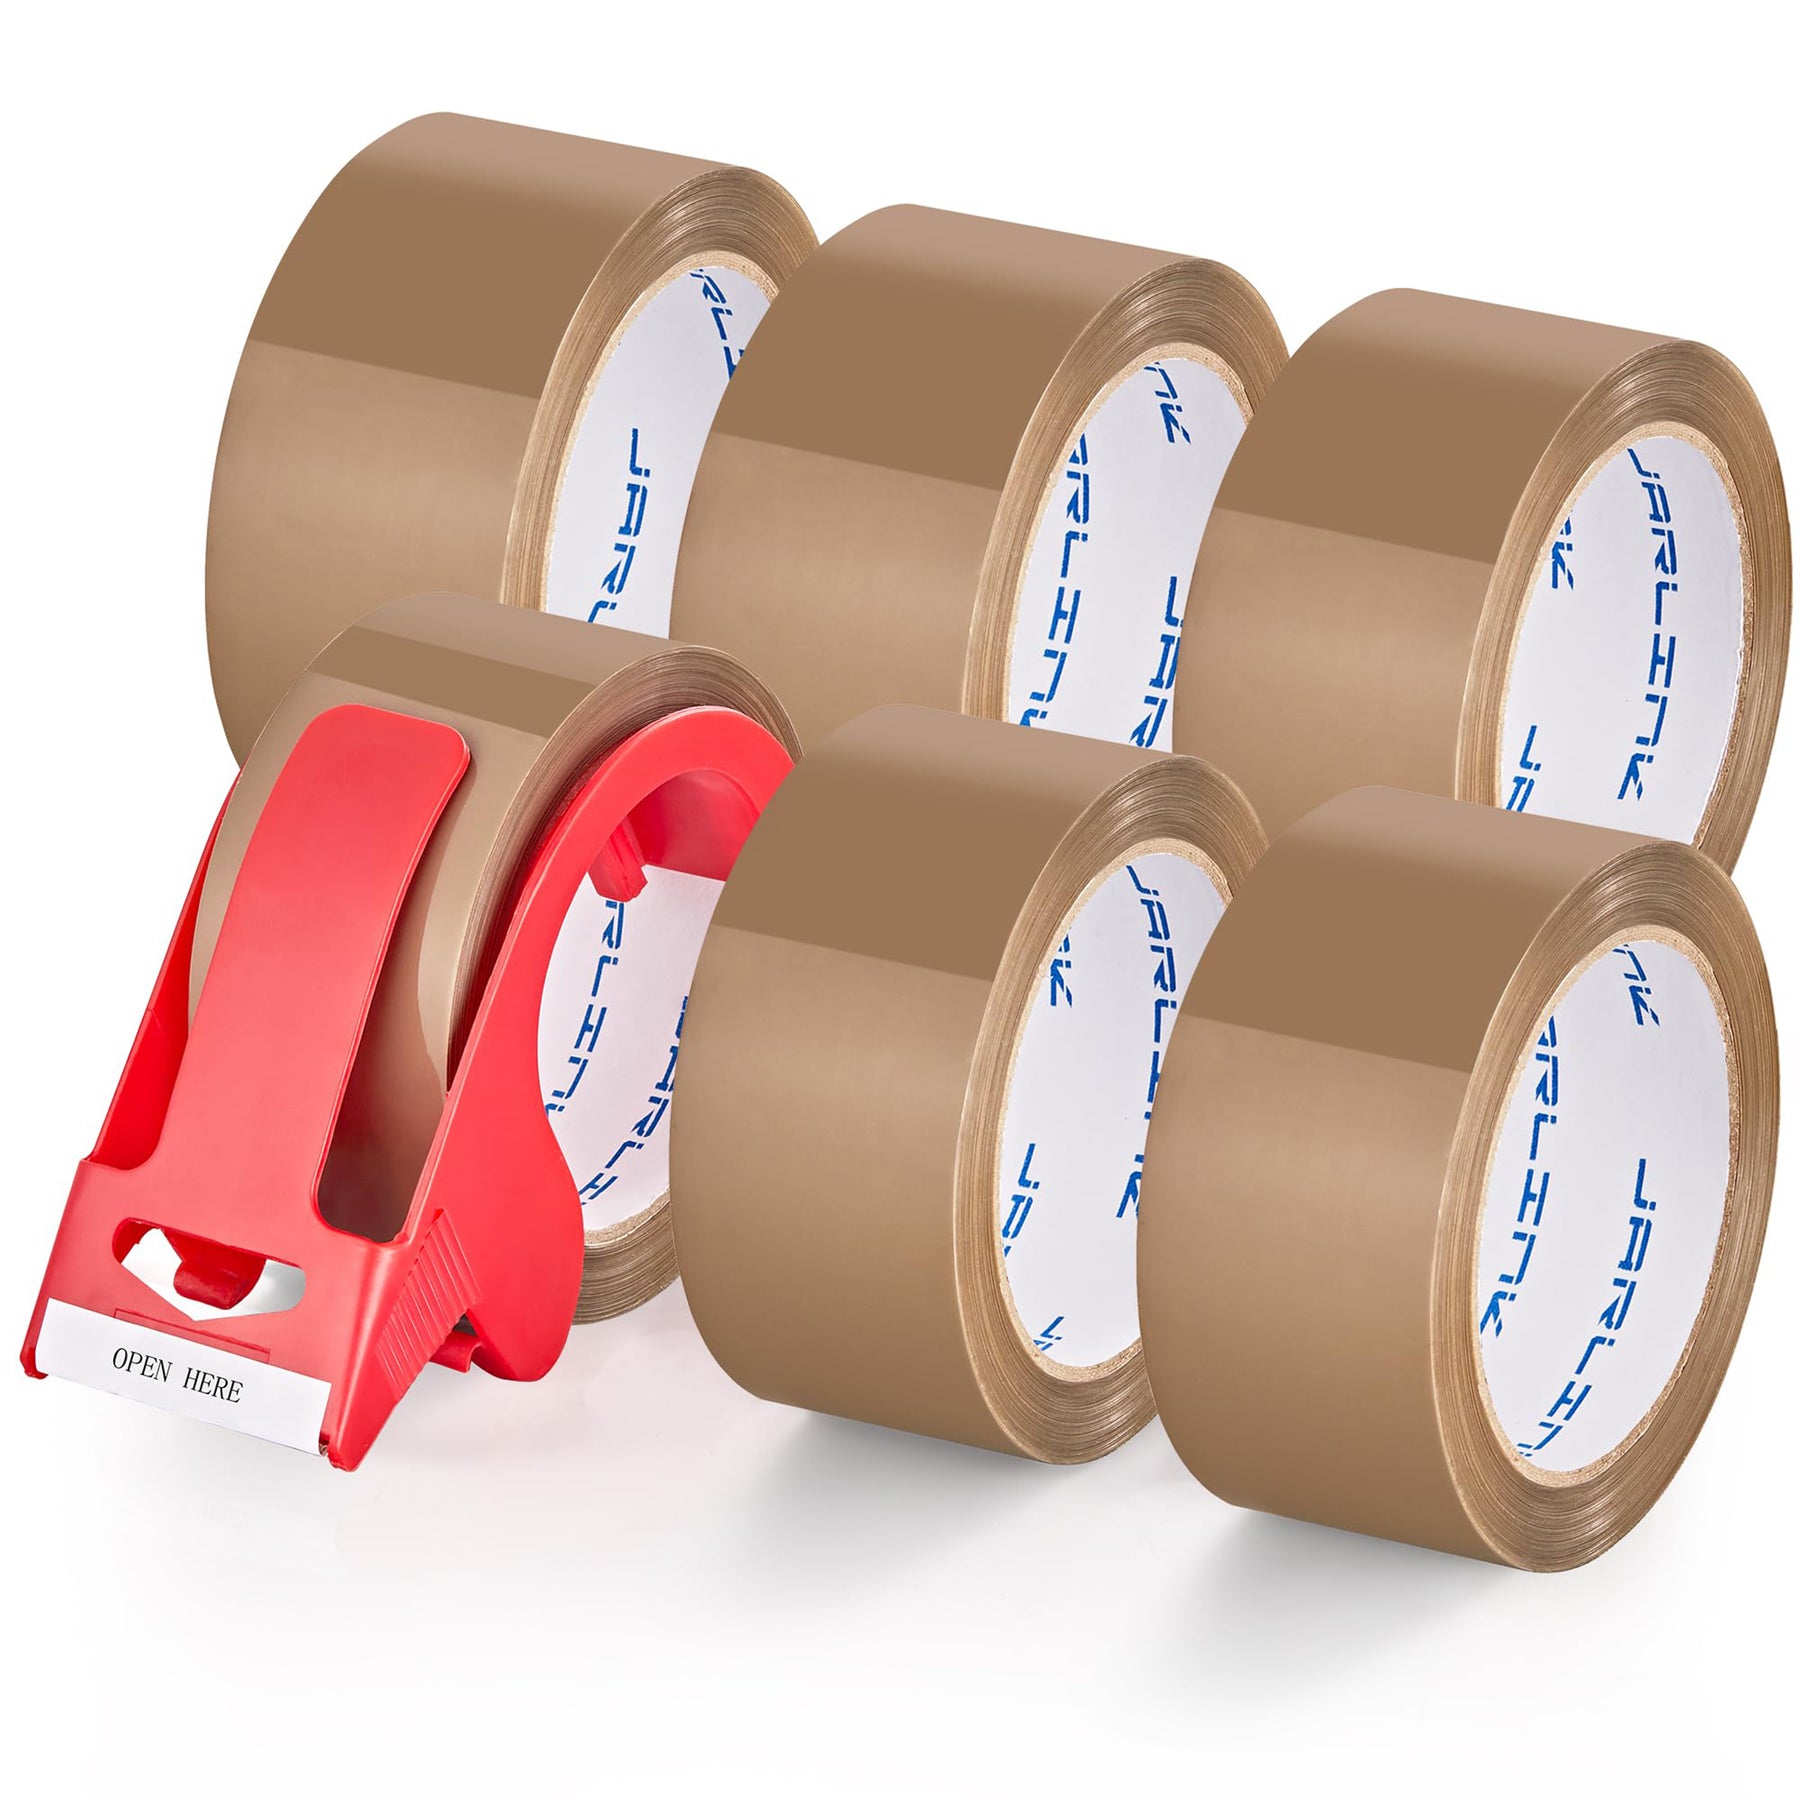 Brixwell DKH100006 Flatback Brown Paper Packing Tape 2 Inch x 60